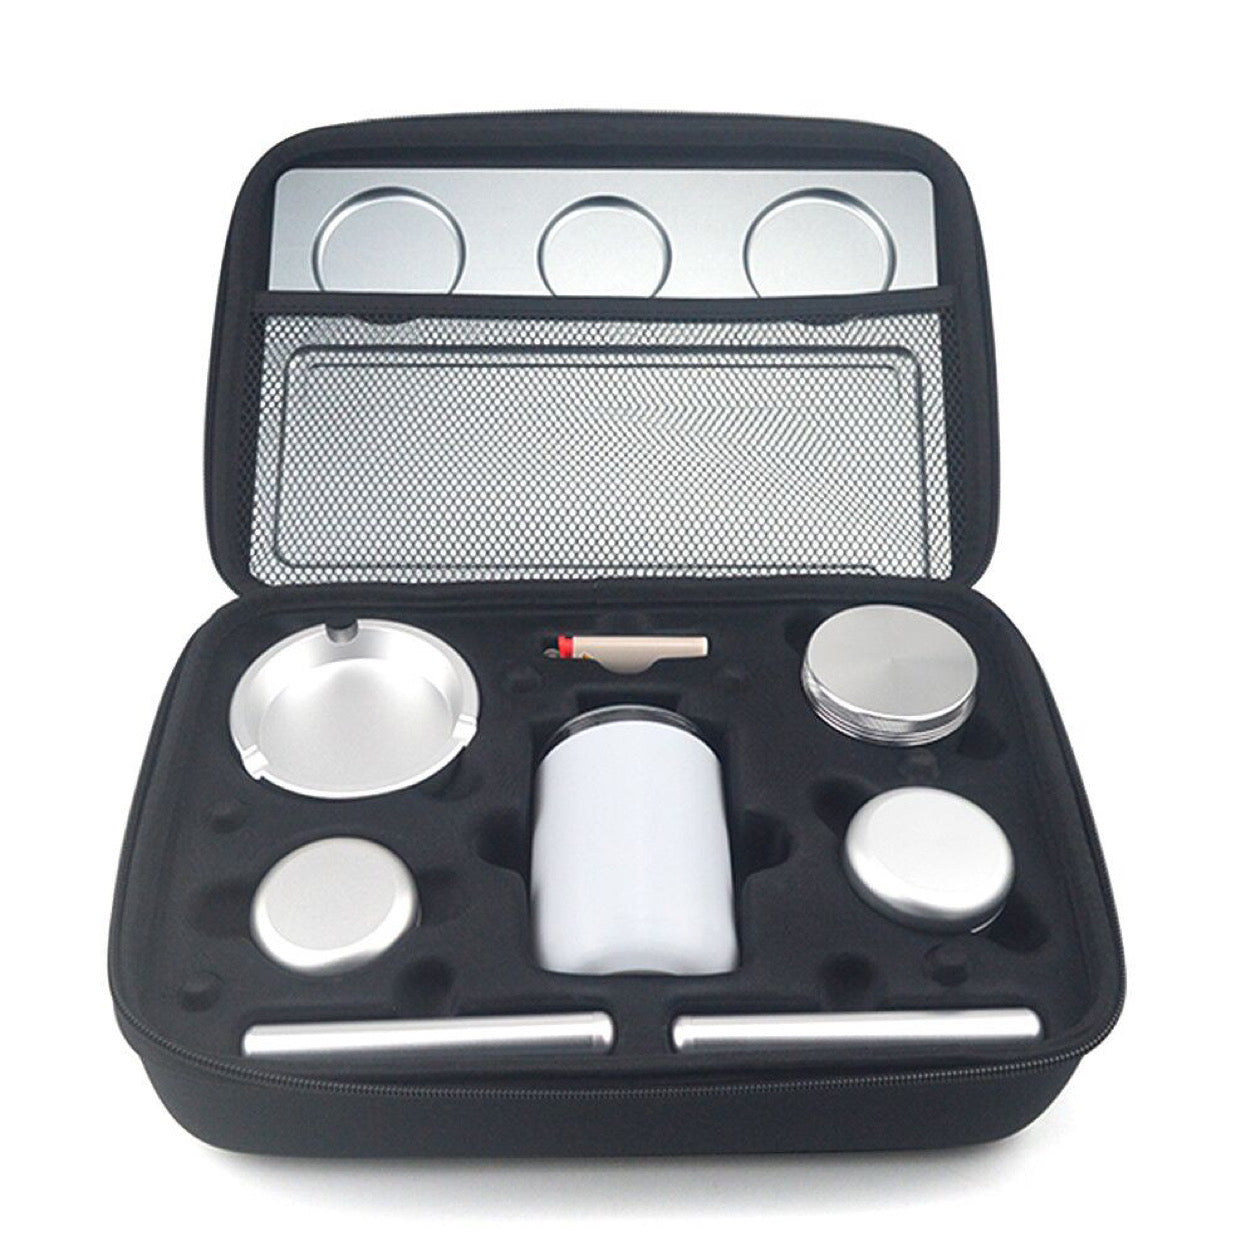 TM Carrying Case - Tokemates